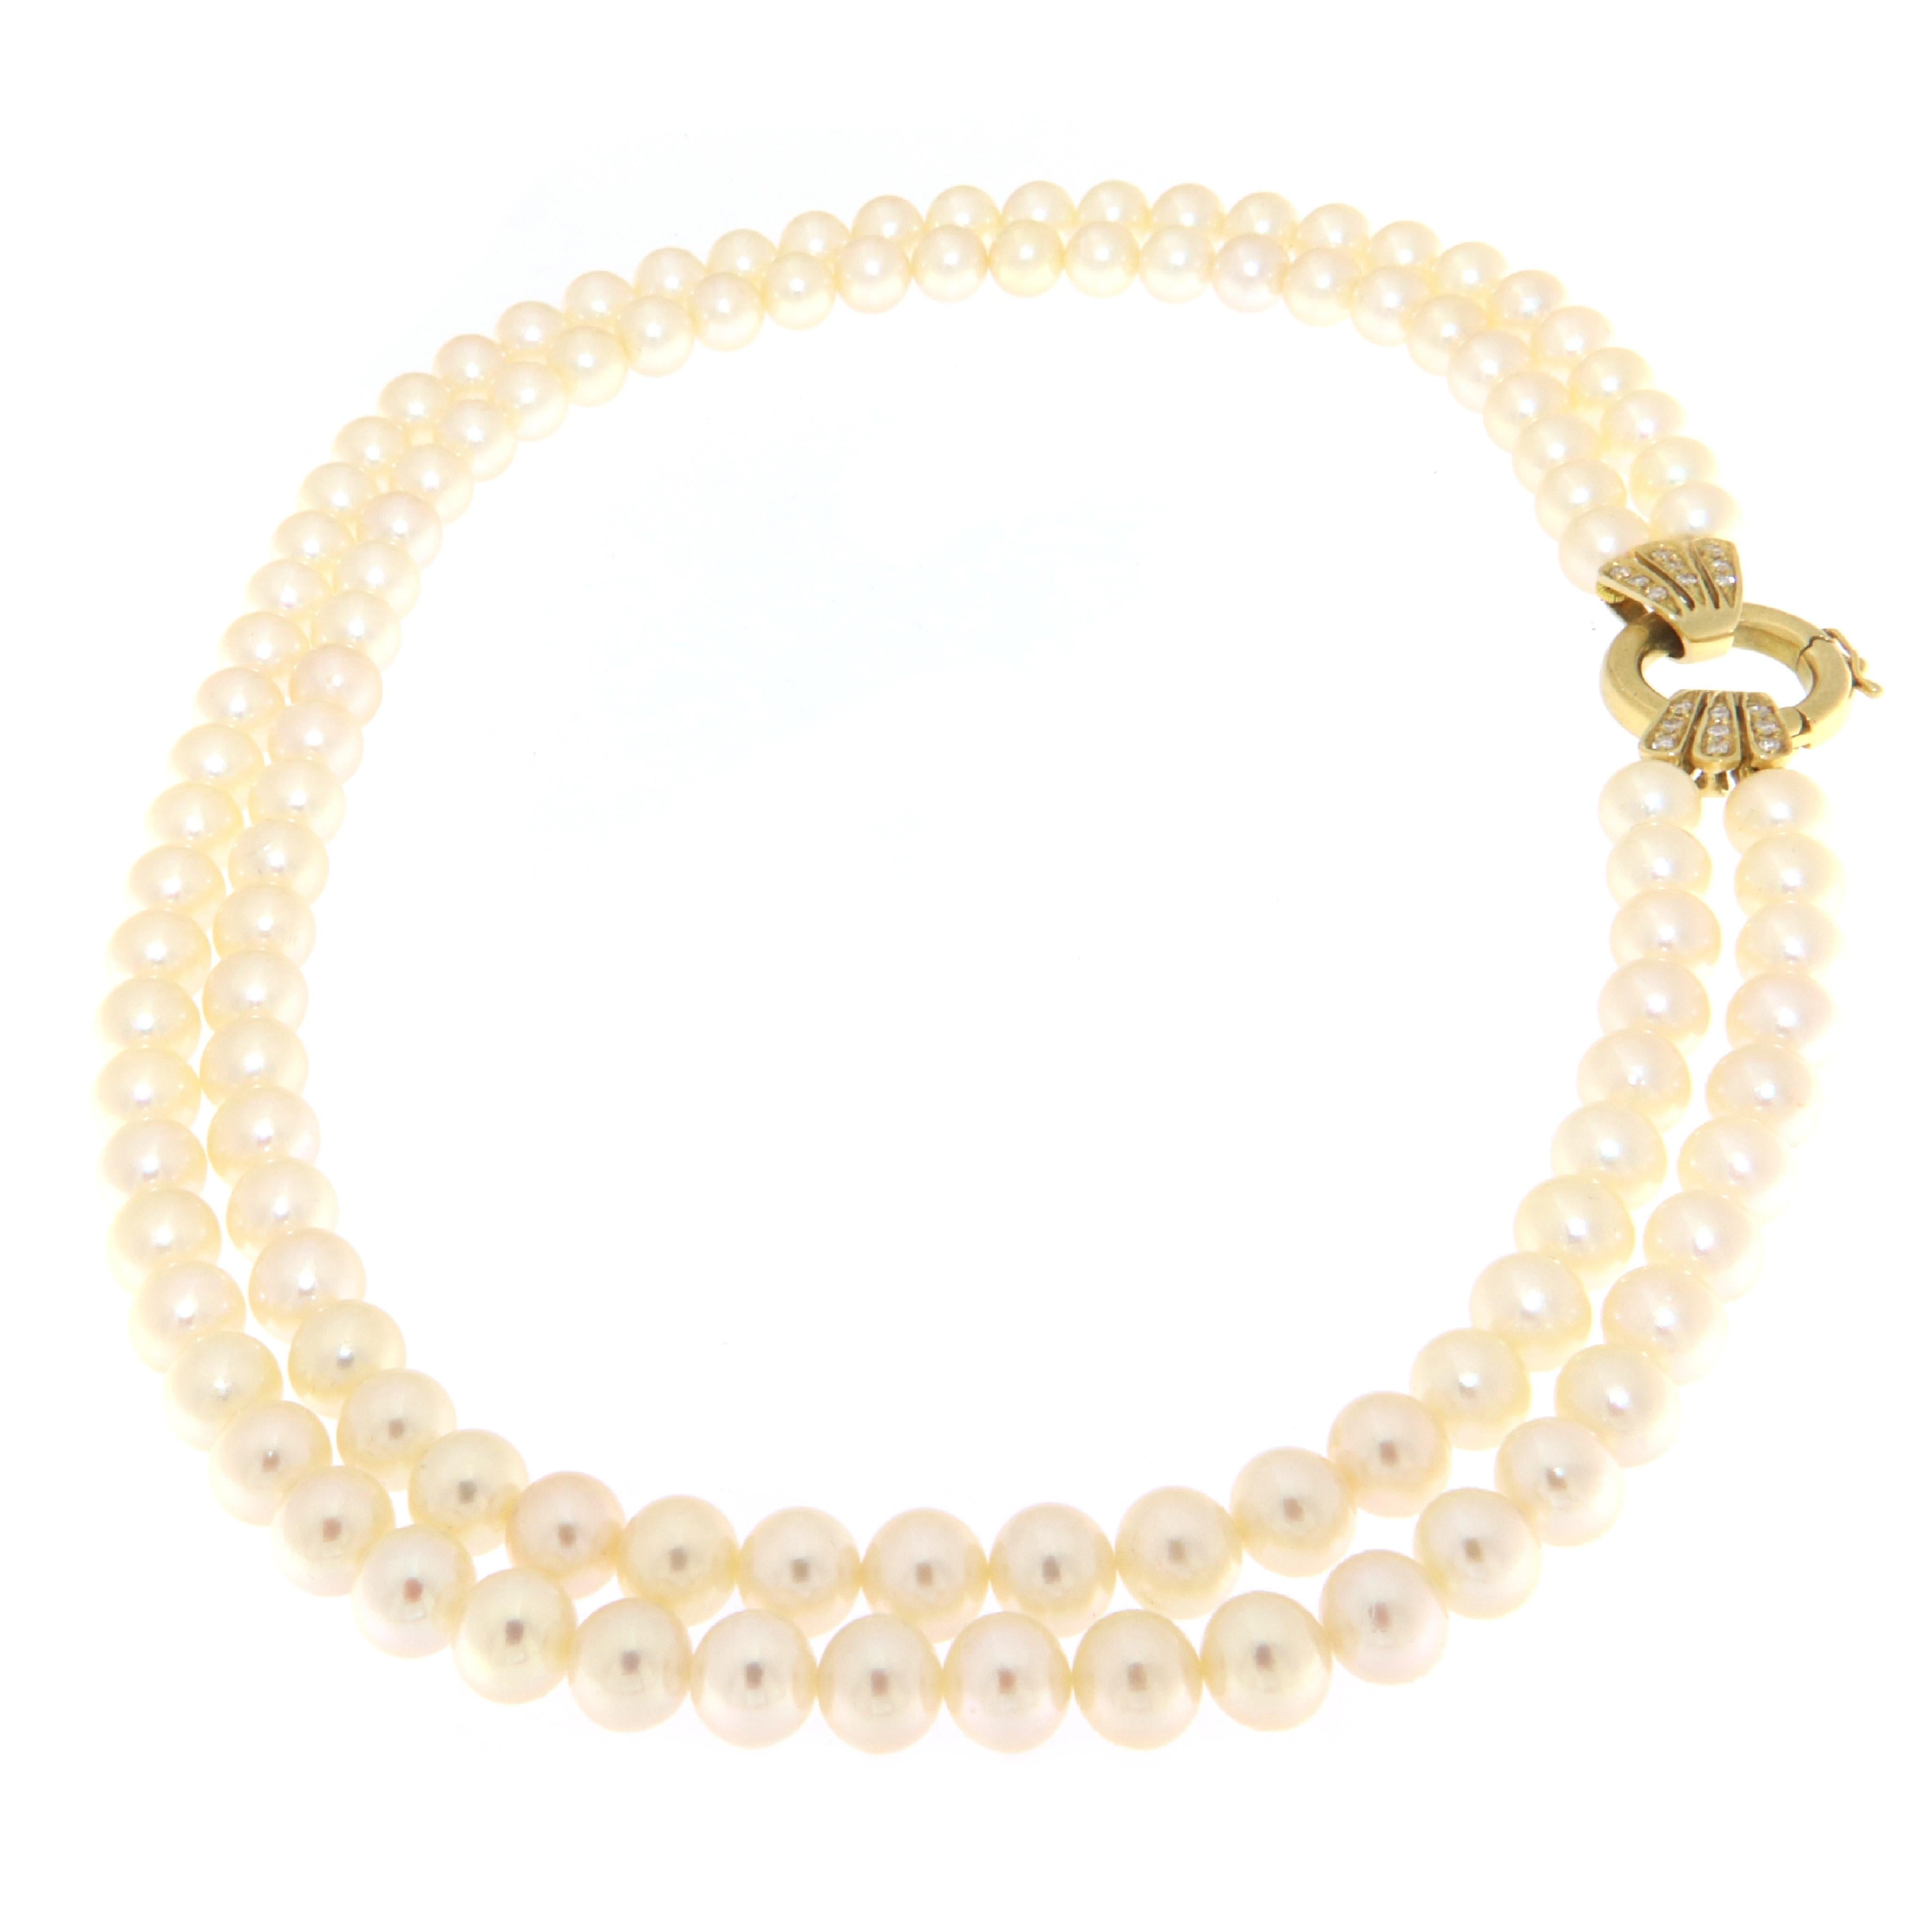 This pearl necklace, with its clasp in 18-karat yellow gold adorned with embedded diamonds, is a classic piece of jewelry reinvented with a touch of modernity. Each pearl, measuring 7 mm in diameter, has been selected for its round shape and smooth,